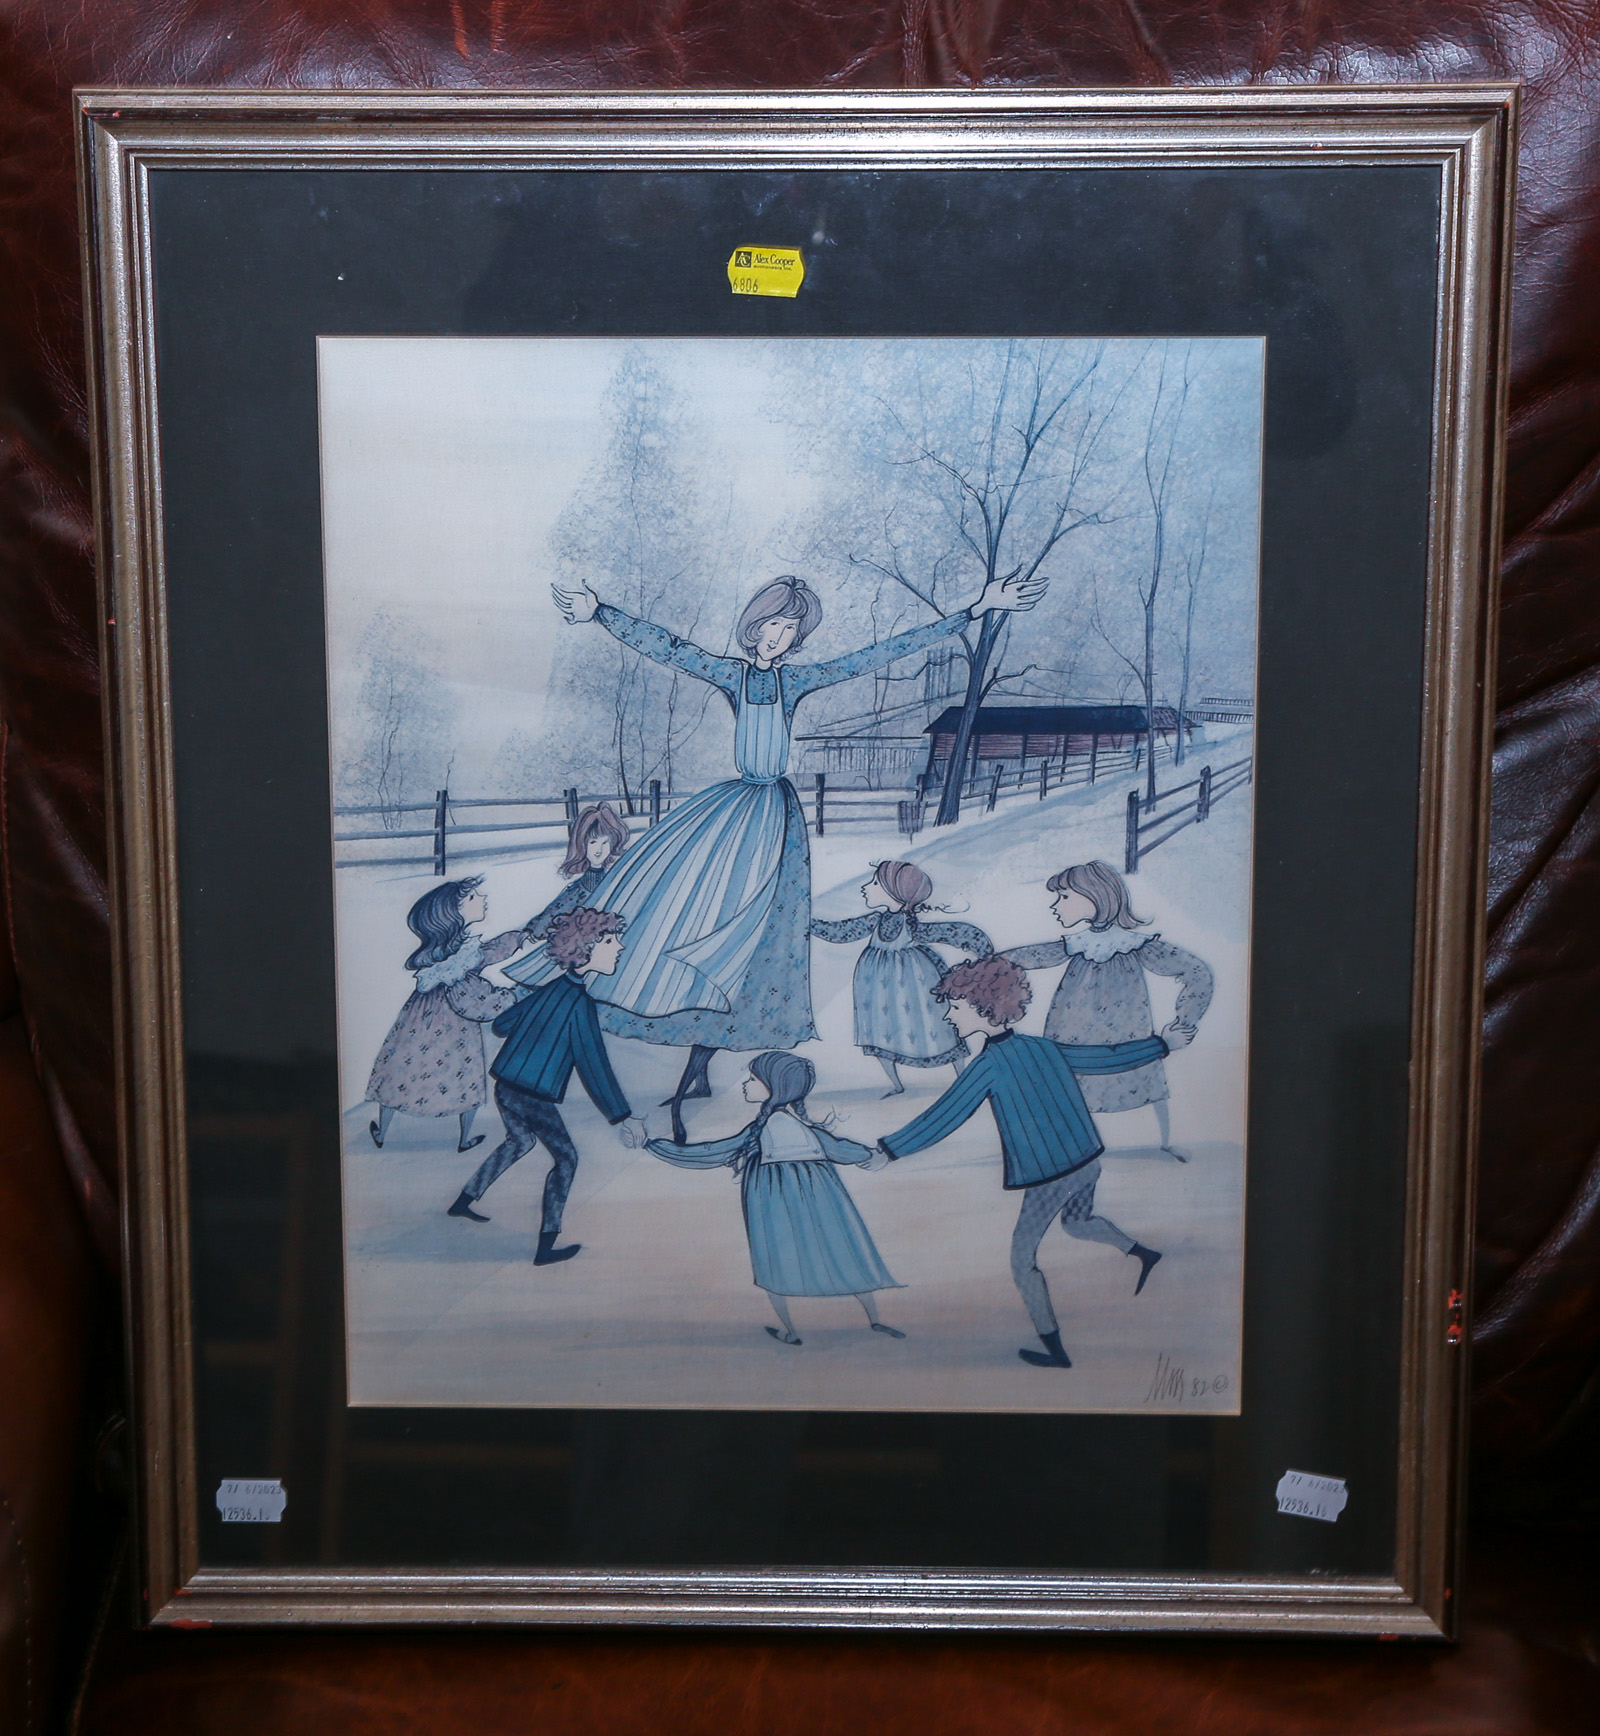 SIGNED PRINT OF CHILDREN PLAYING